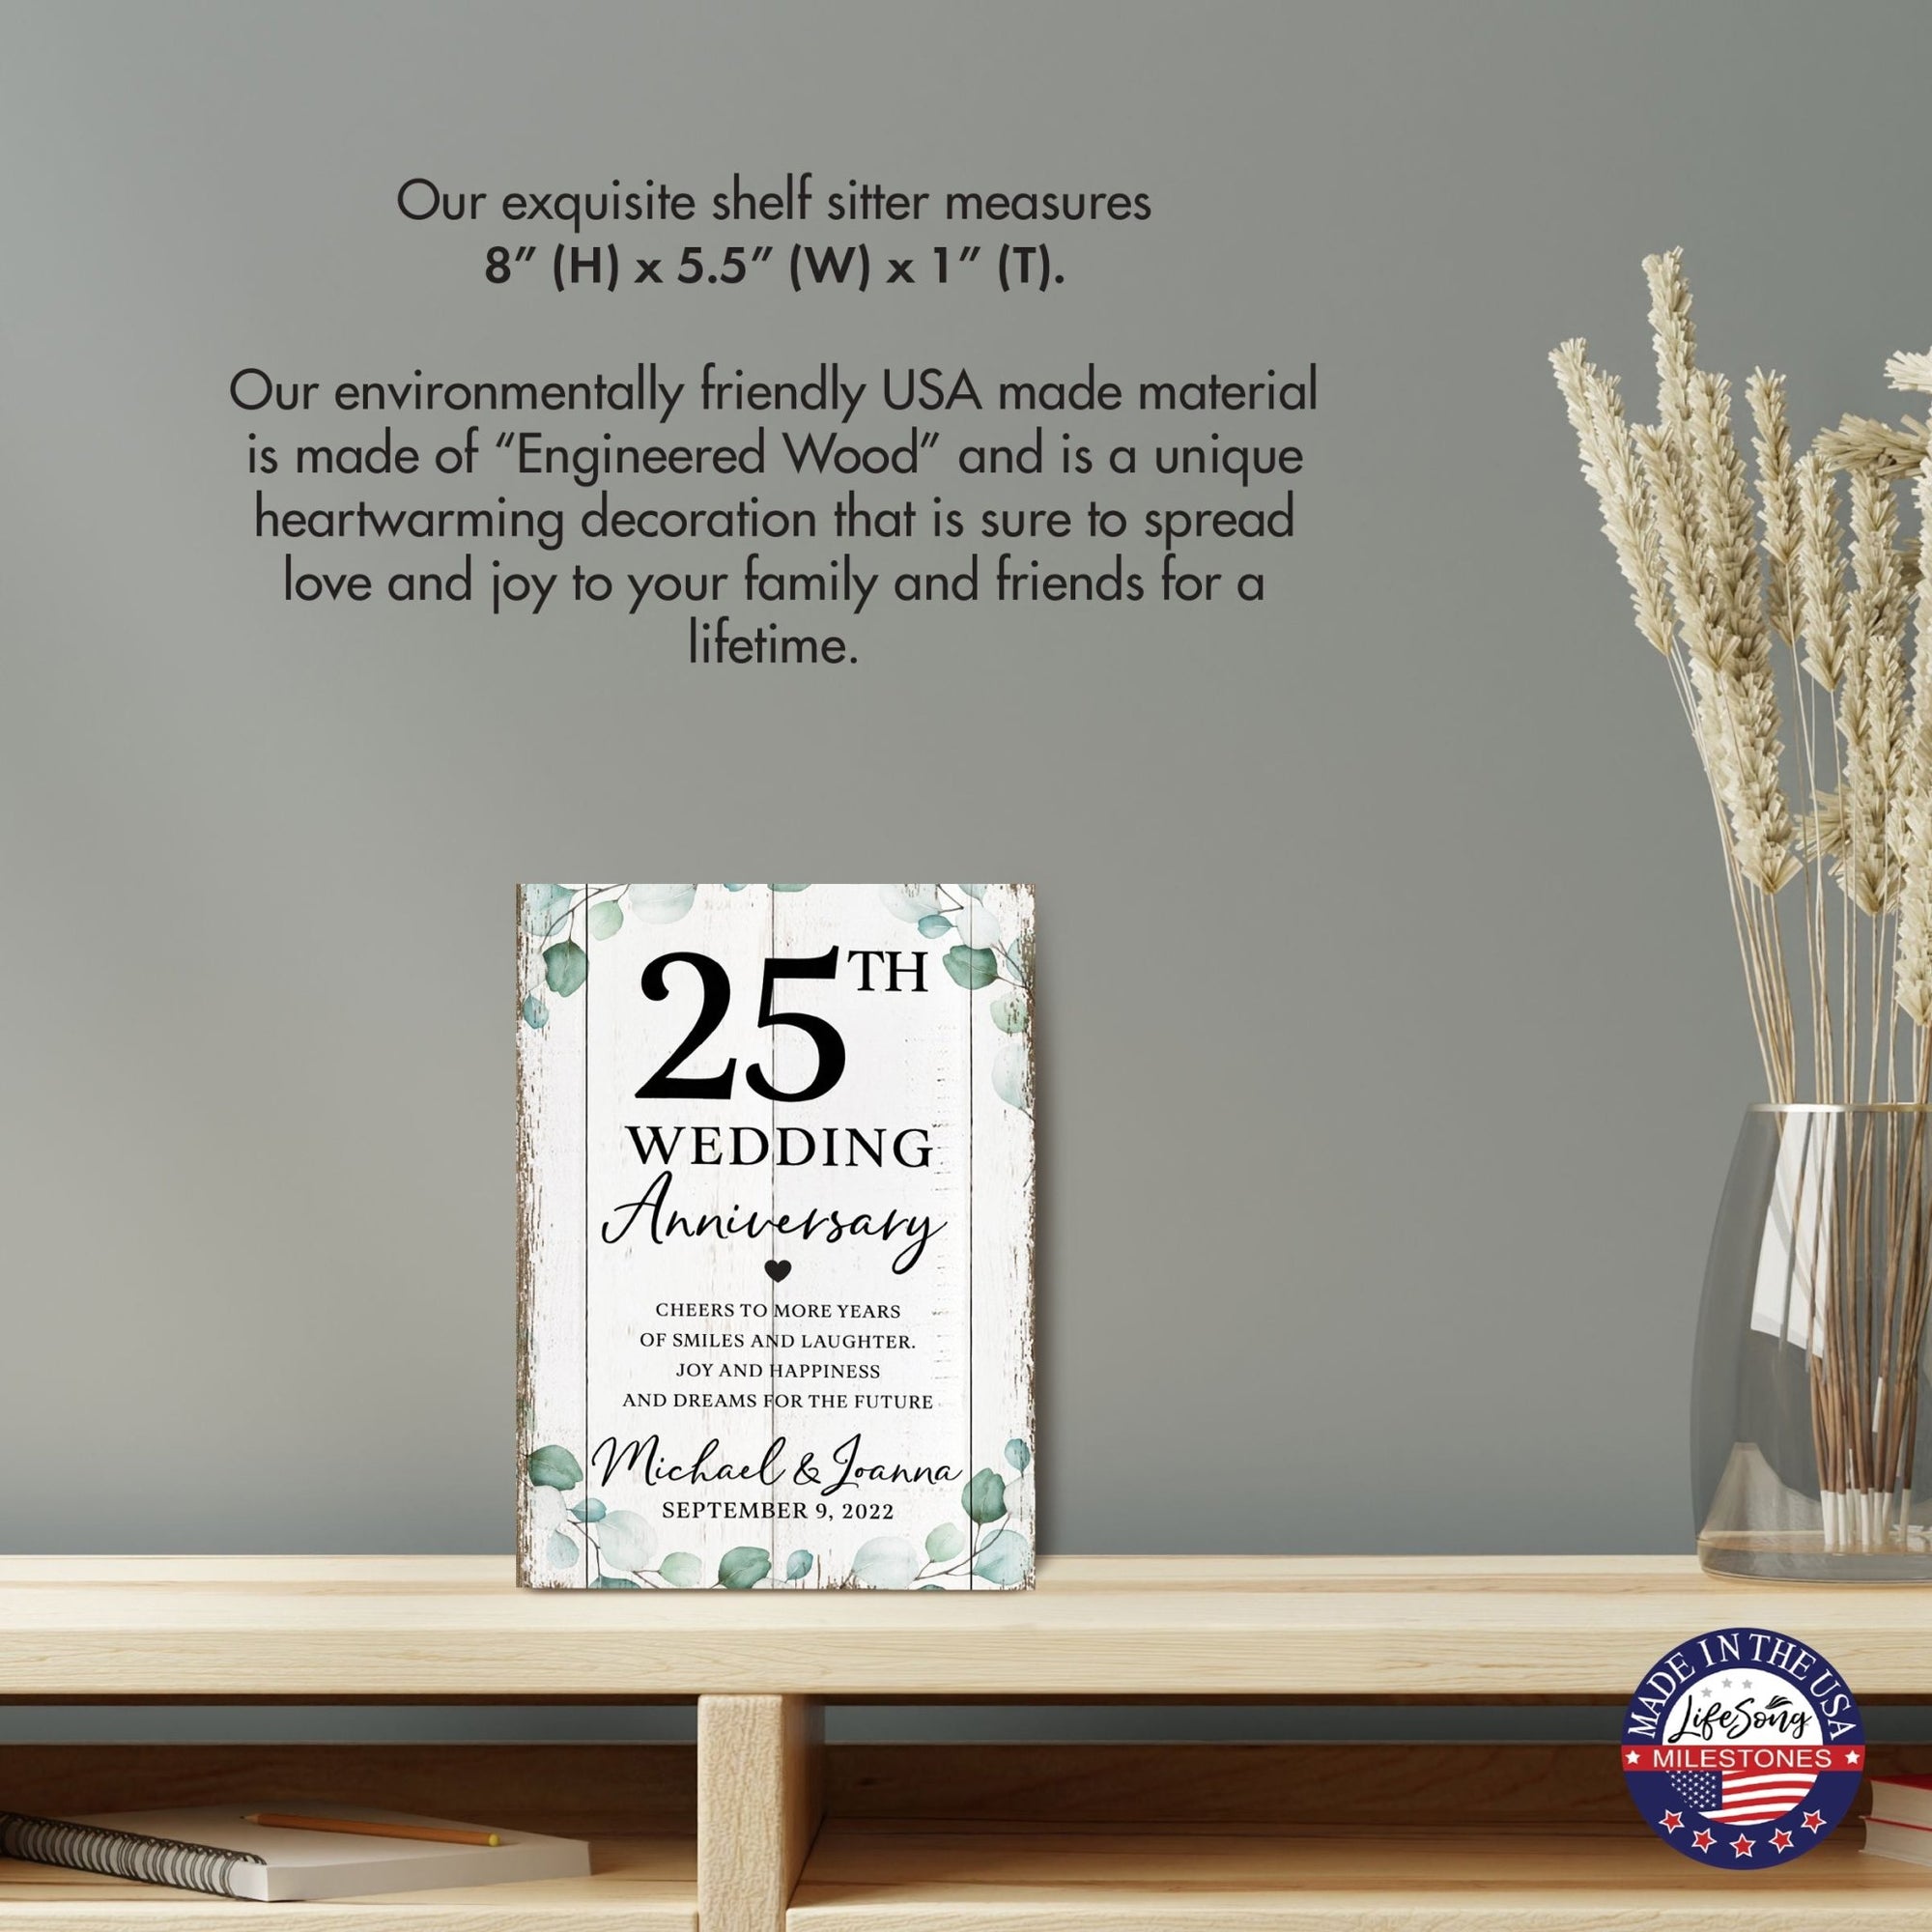 Personalized 25th Wedding Anniversary Unique Shelf Décor and Tabletop Signs - Cheers To More Years - LifeSong Milestones